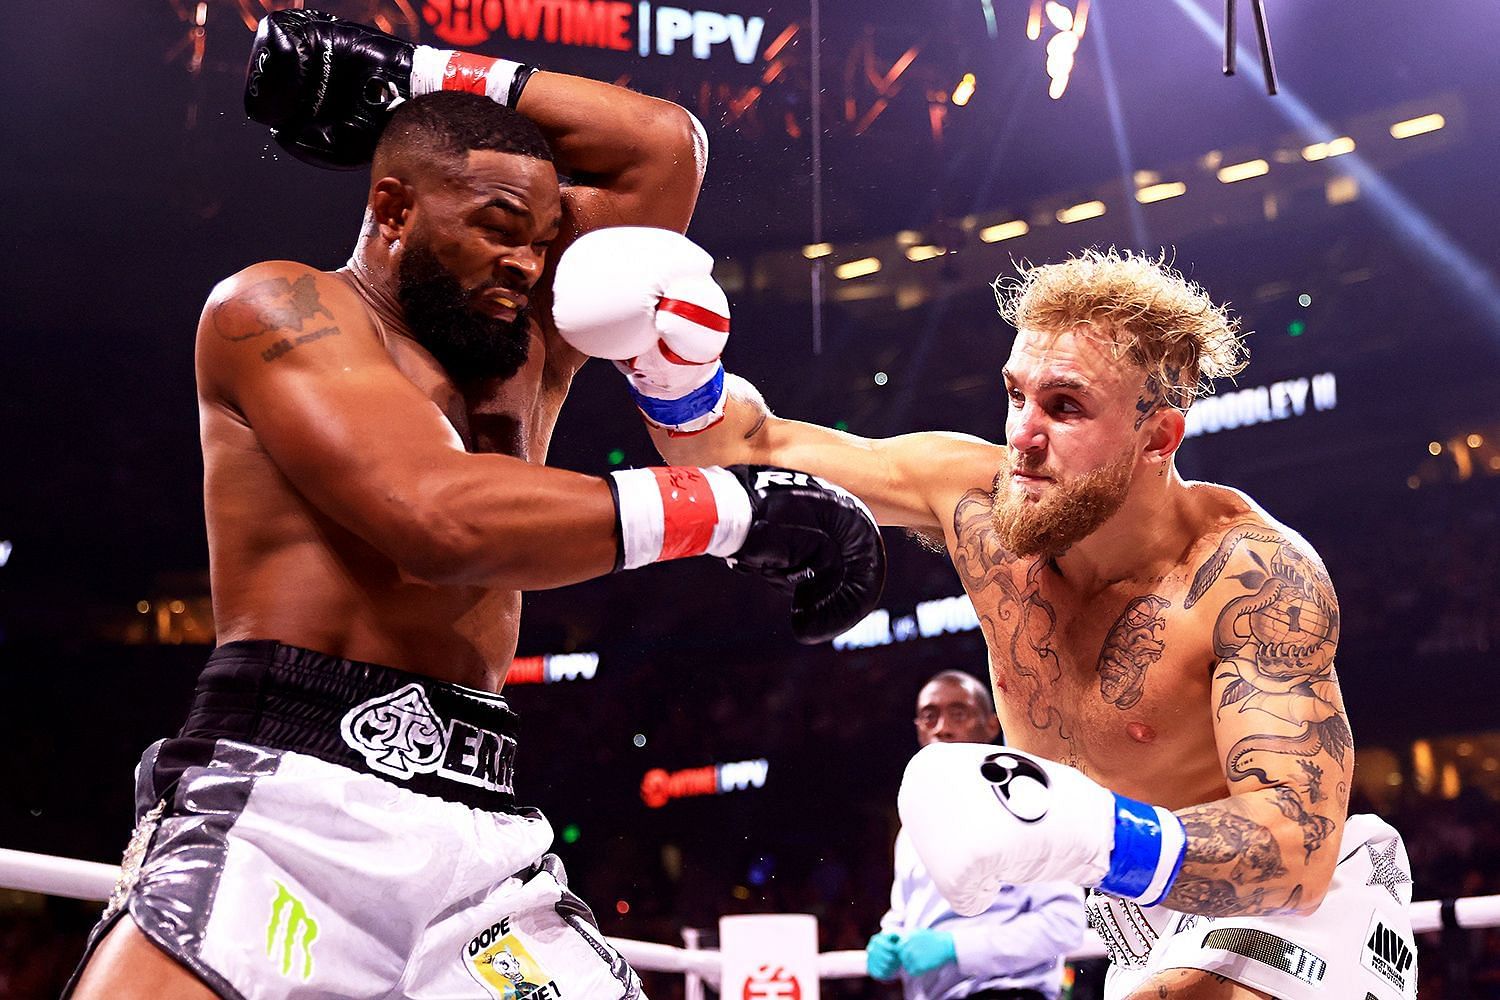 Jake Paul was recently victorious over Tyron Woodley